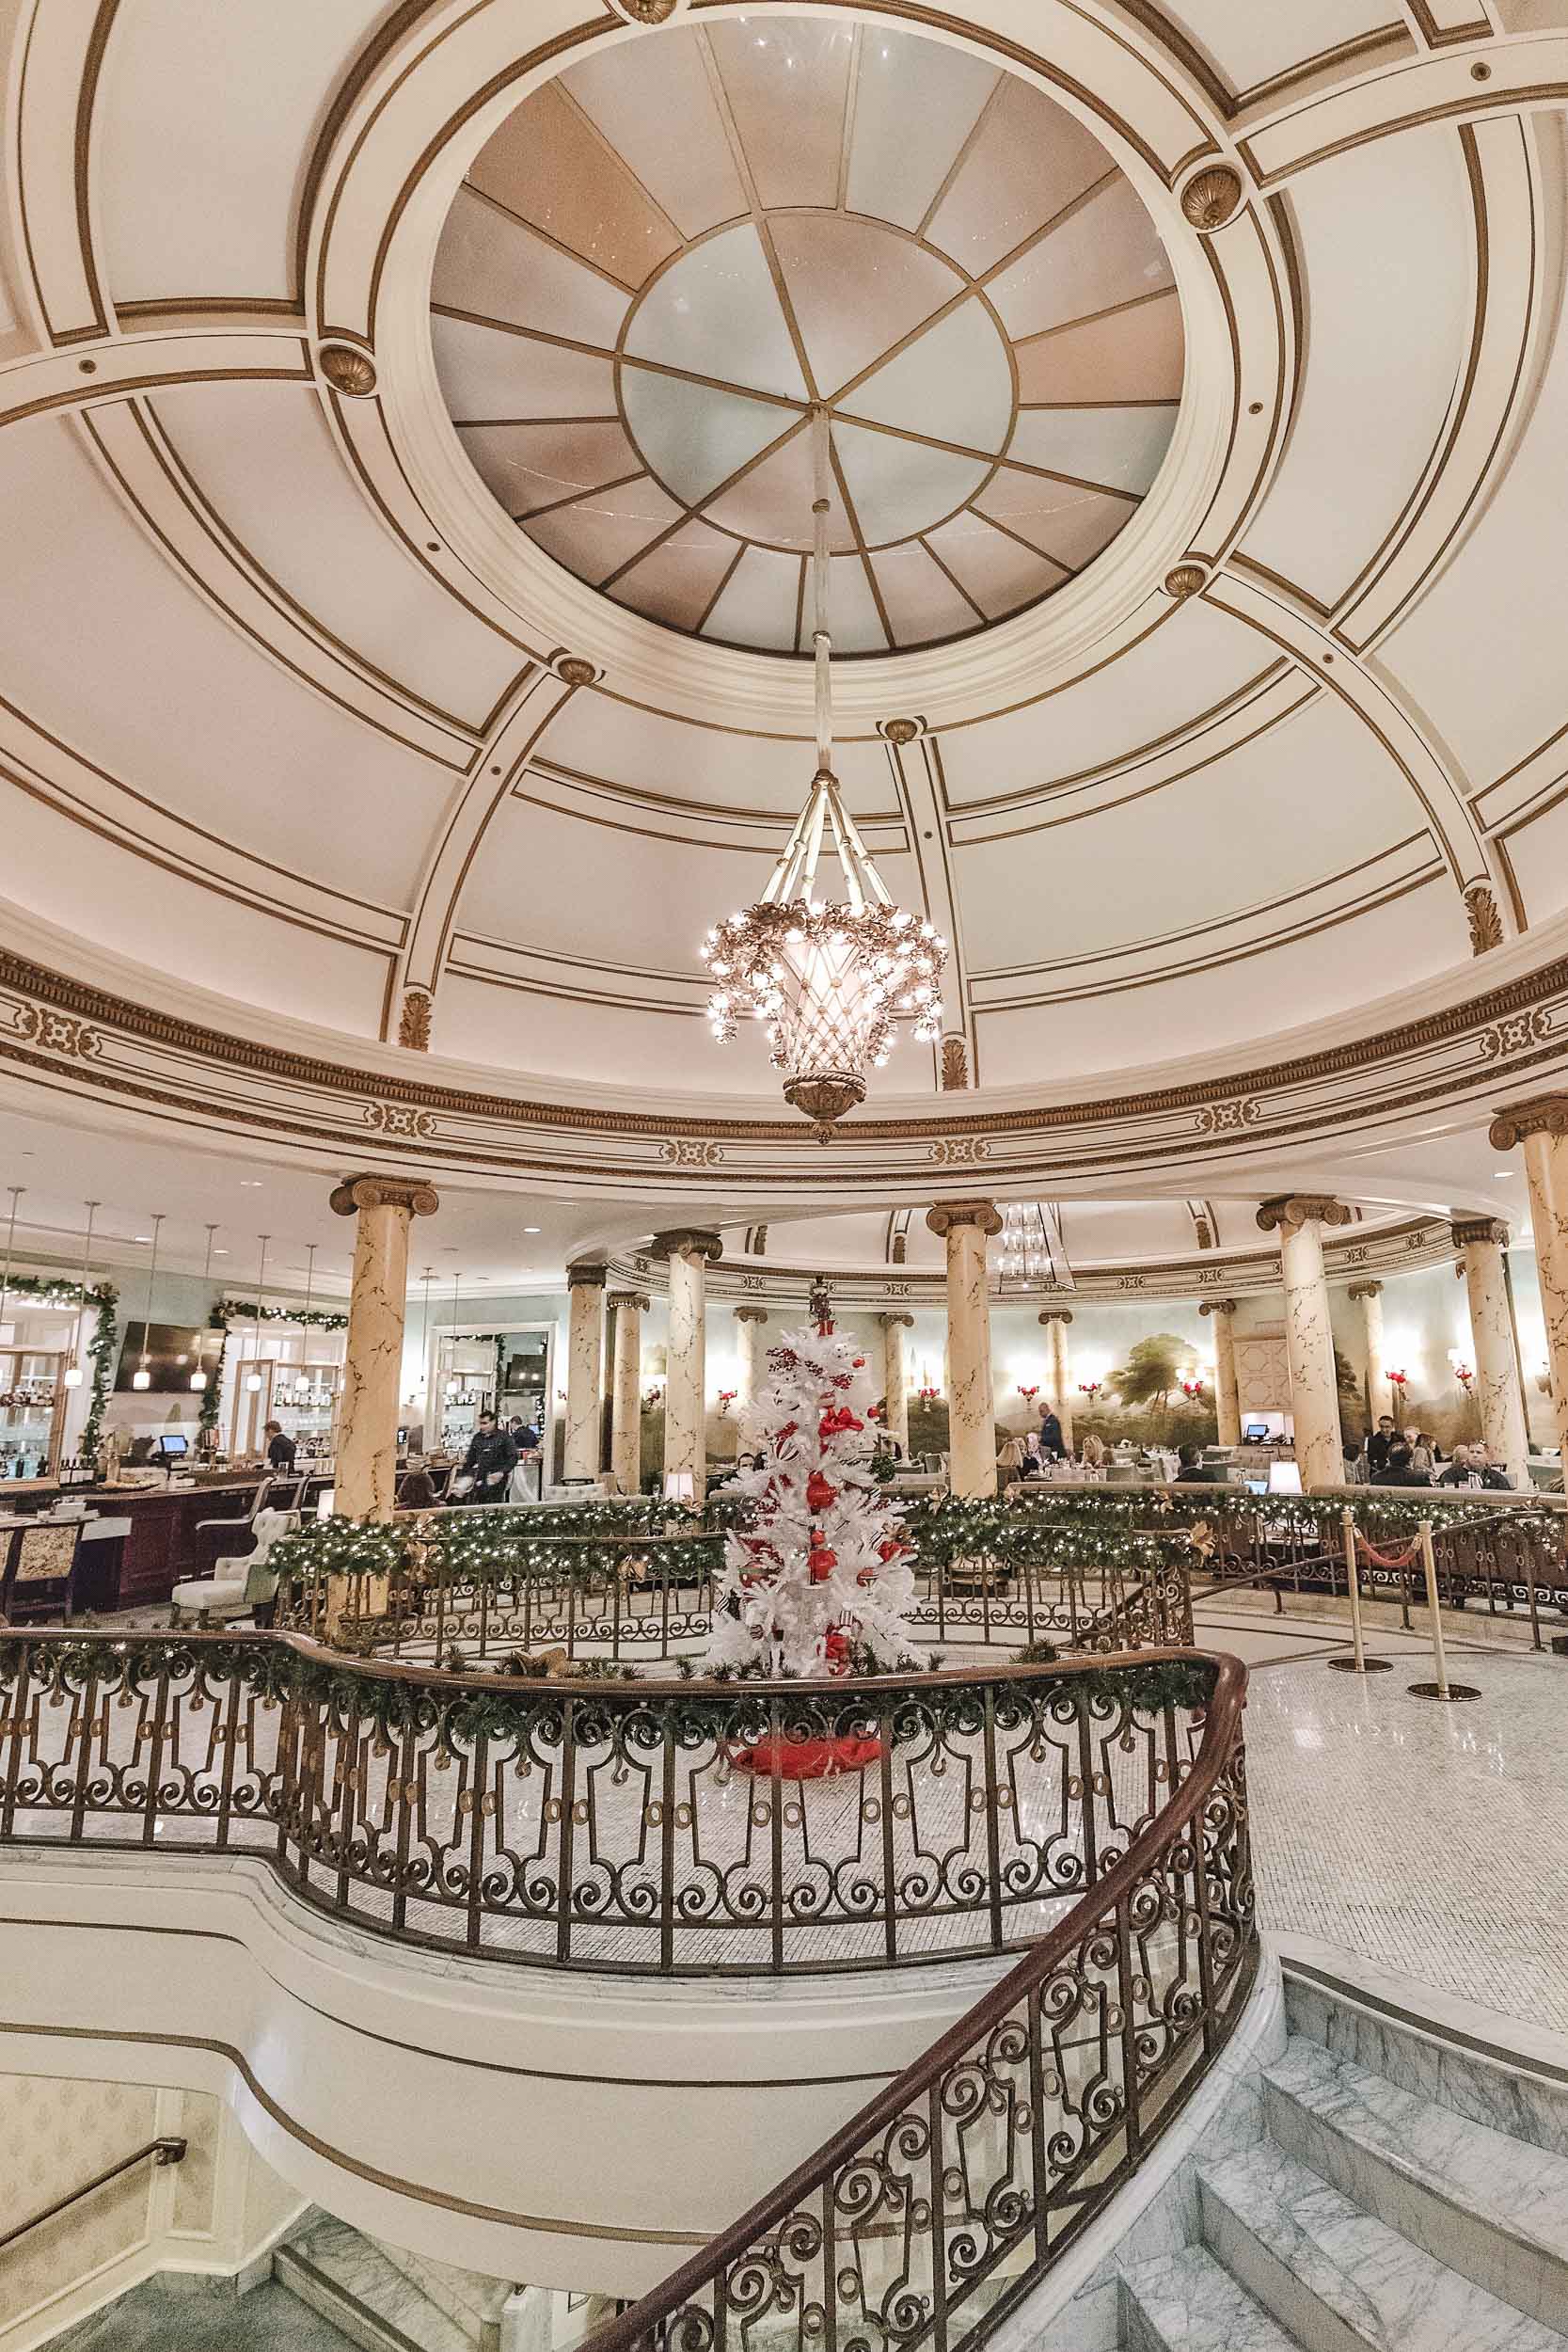 Laurel Court Restaurant & Bar at the Fairmont San Francisco offers afternoon tea year-round, but during the holidays there is a special holiday gingerbread tea!